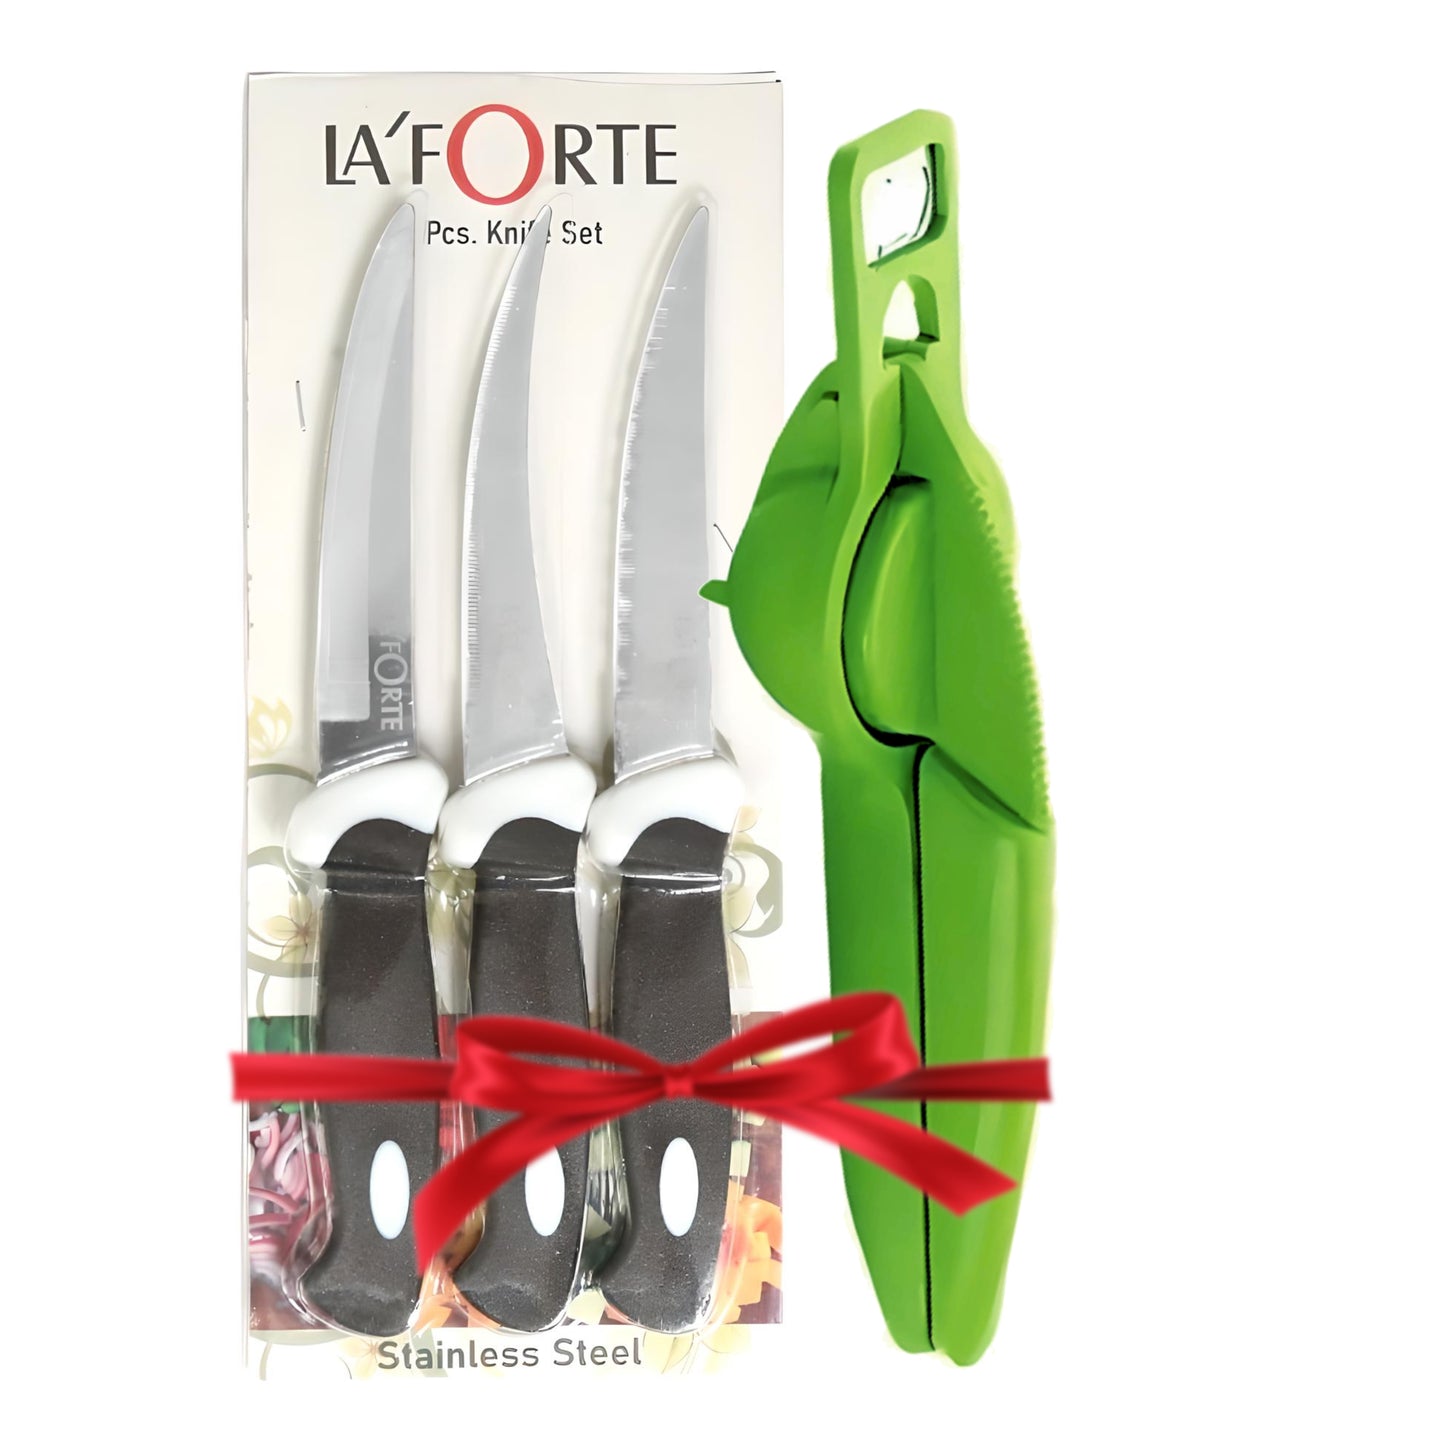 LA' FORTE Lemon Squeezer (2 in 1) and Knife Set Combo